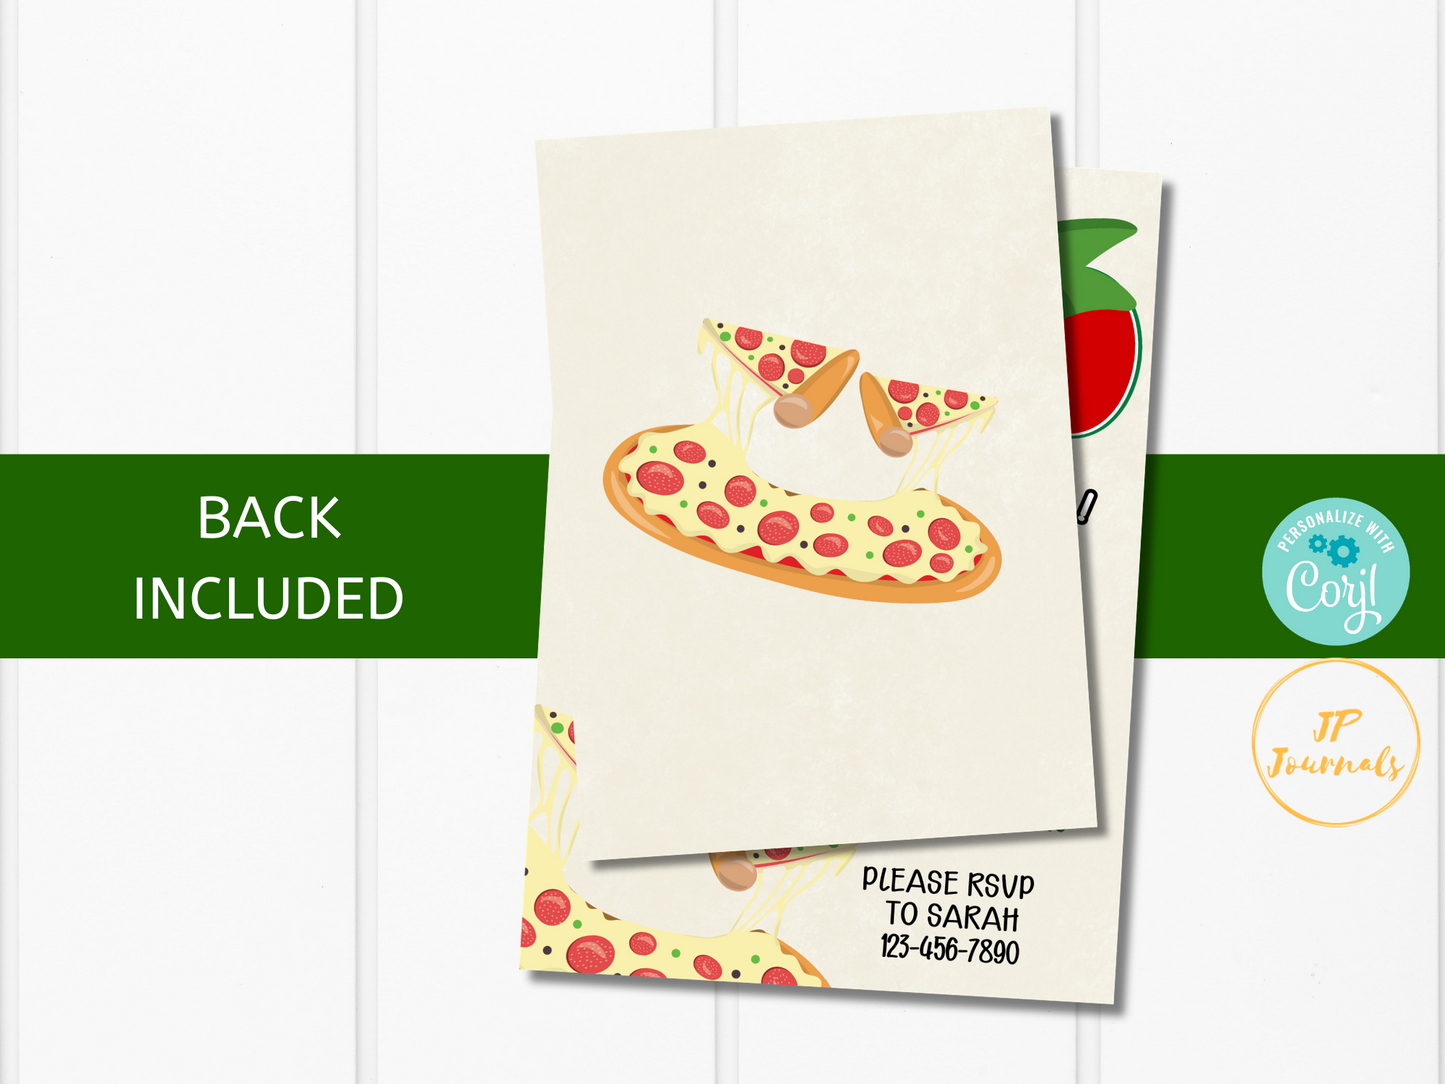 Editable Printable Pizza Party Invitation Template - Pizza Birthday Party Invite - Edit and Print - Pizza Parlor Green Red